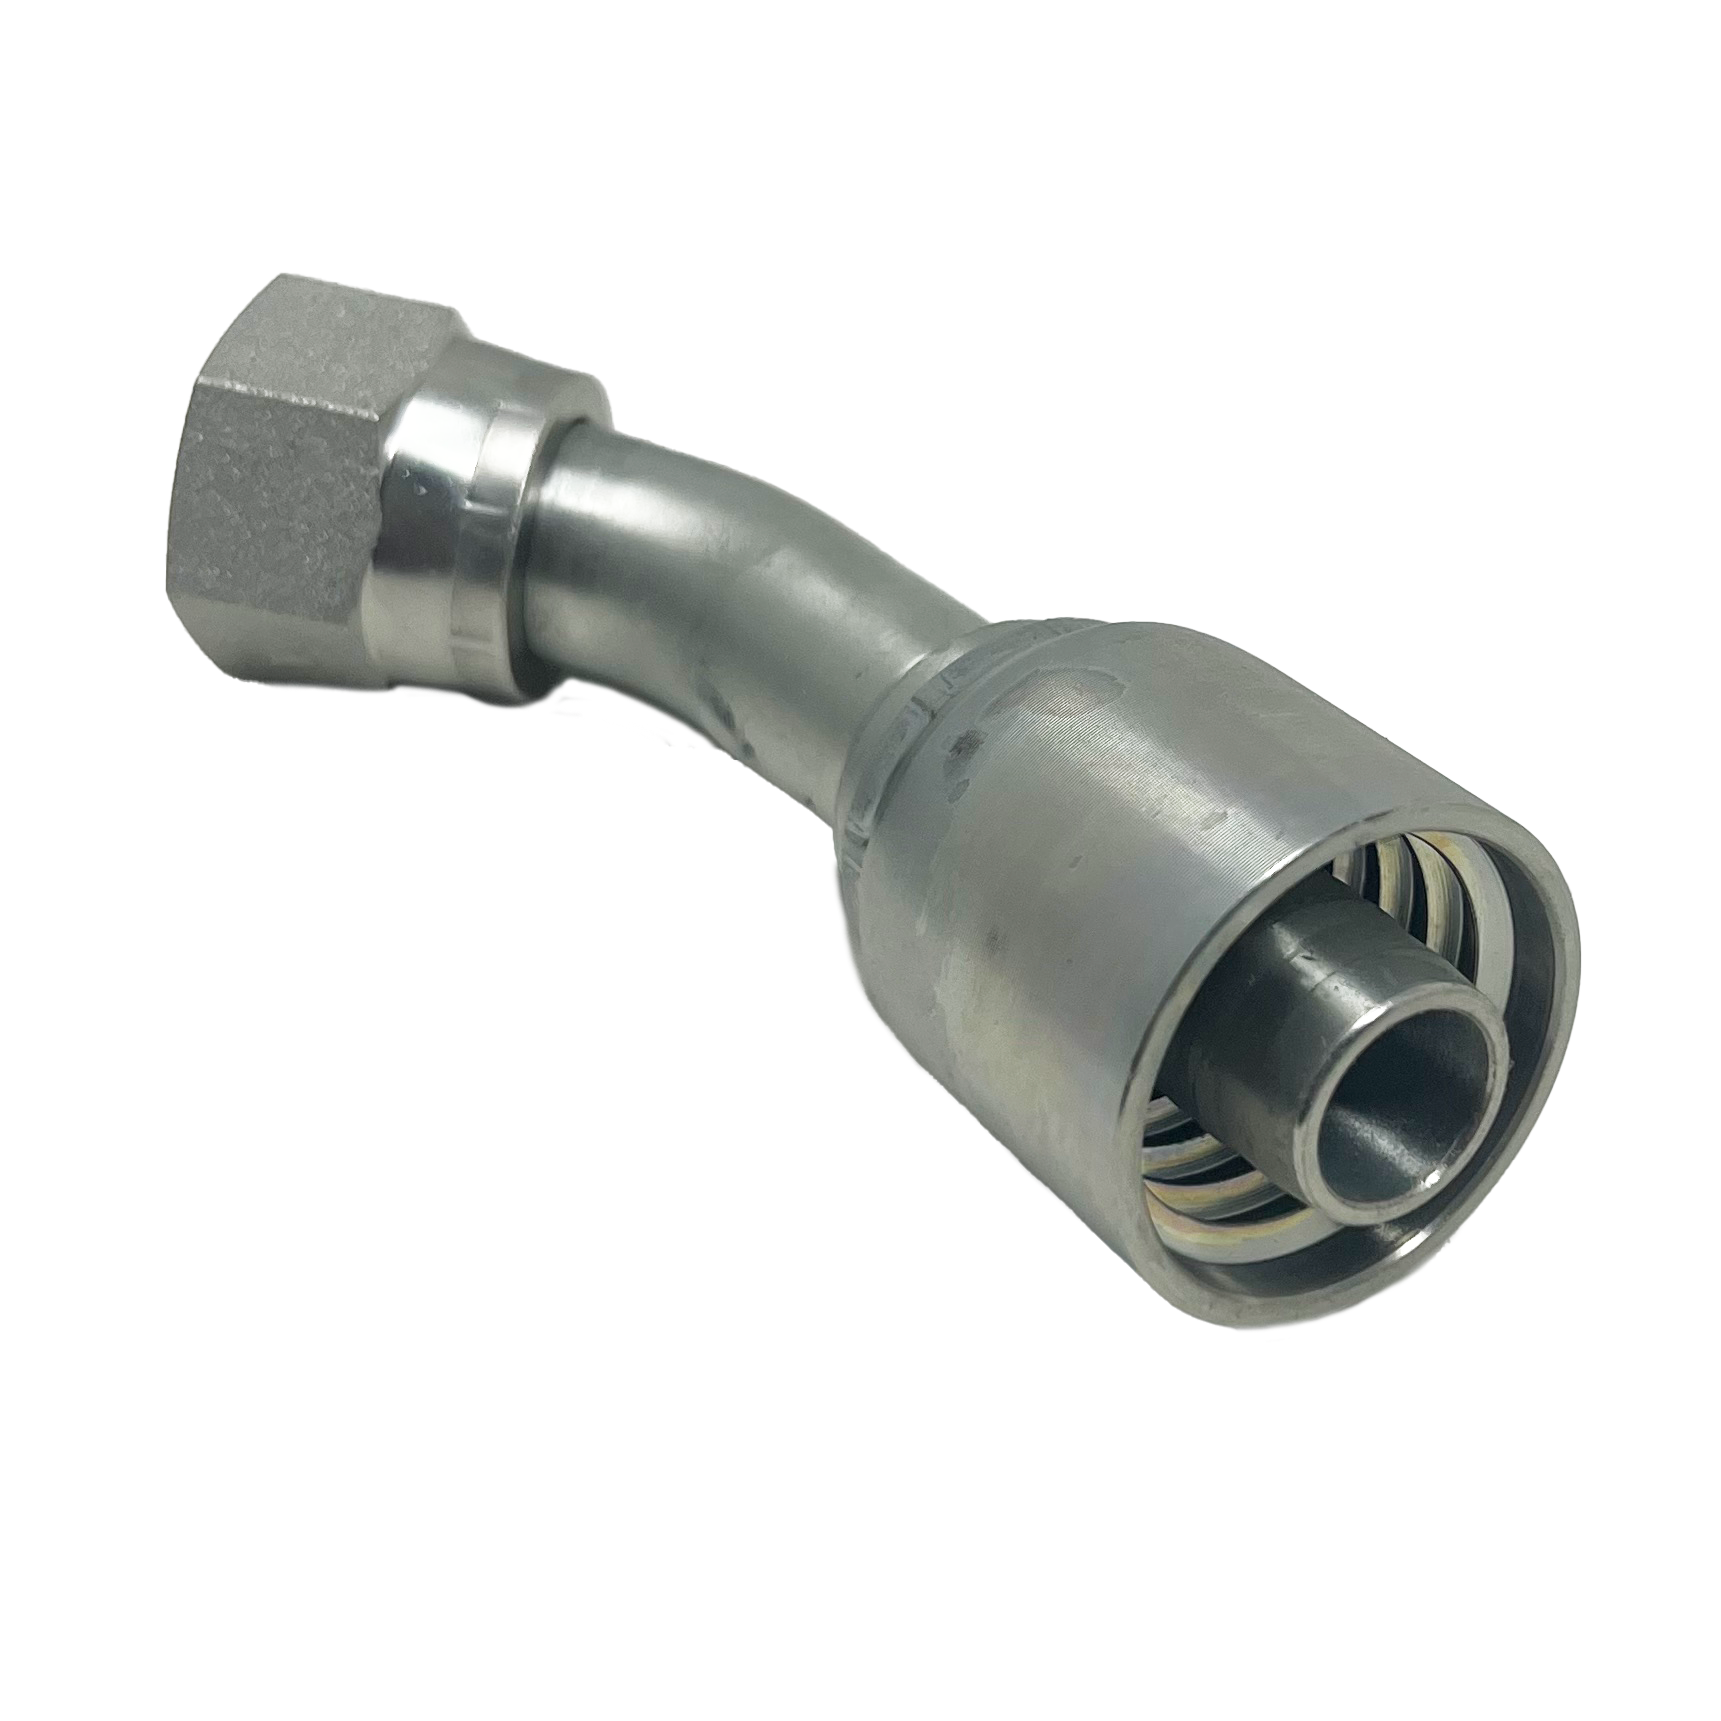 B2-JCFX45-1612: Continental Hose Fitting, 1" Hose ID x 1-1/16-12 Female JIC, 45-Degree Swivel Connection